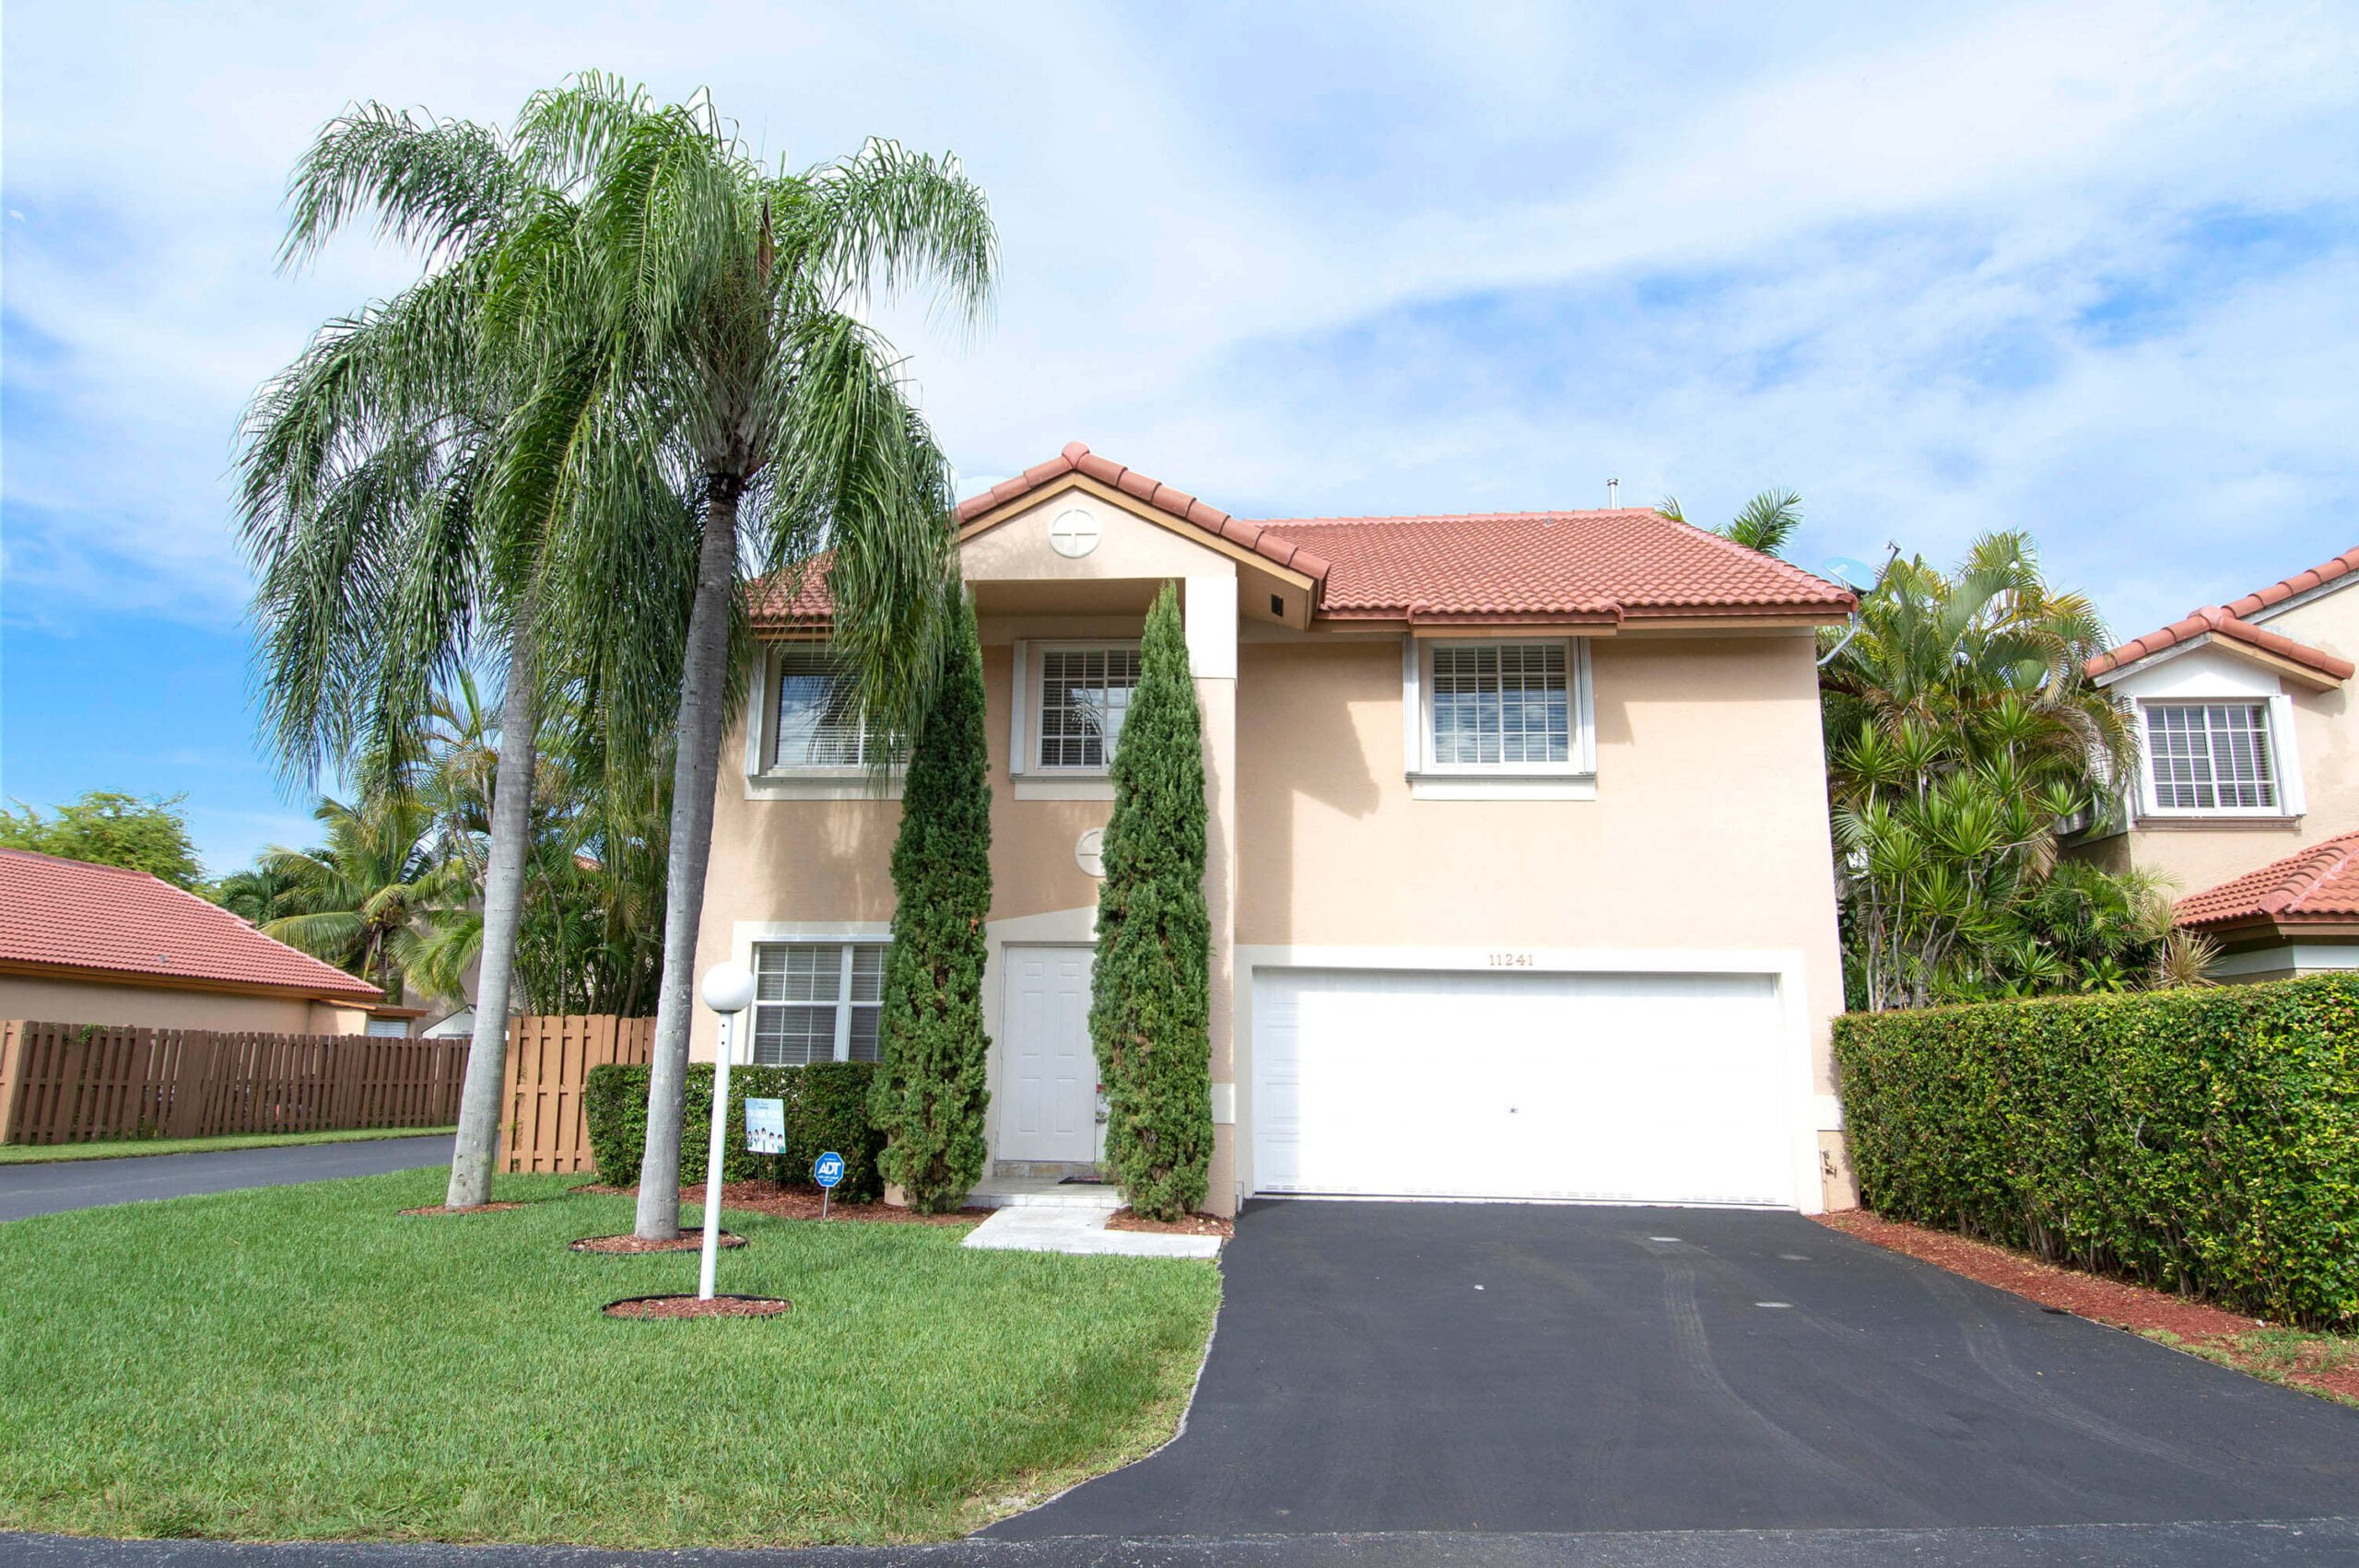 House Front - 11241 SW 151st Court, Miami, FL 33196 - © Flat Fee Florida Realty